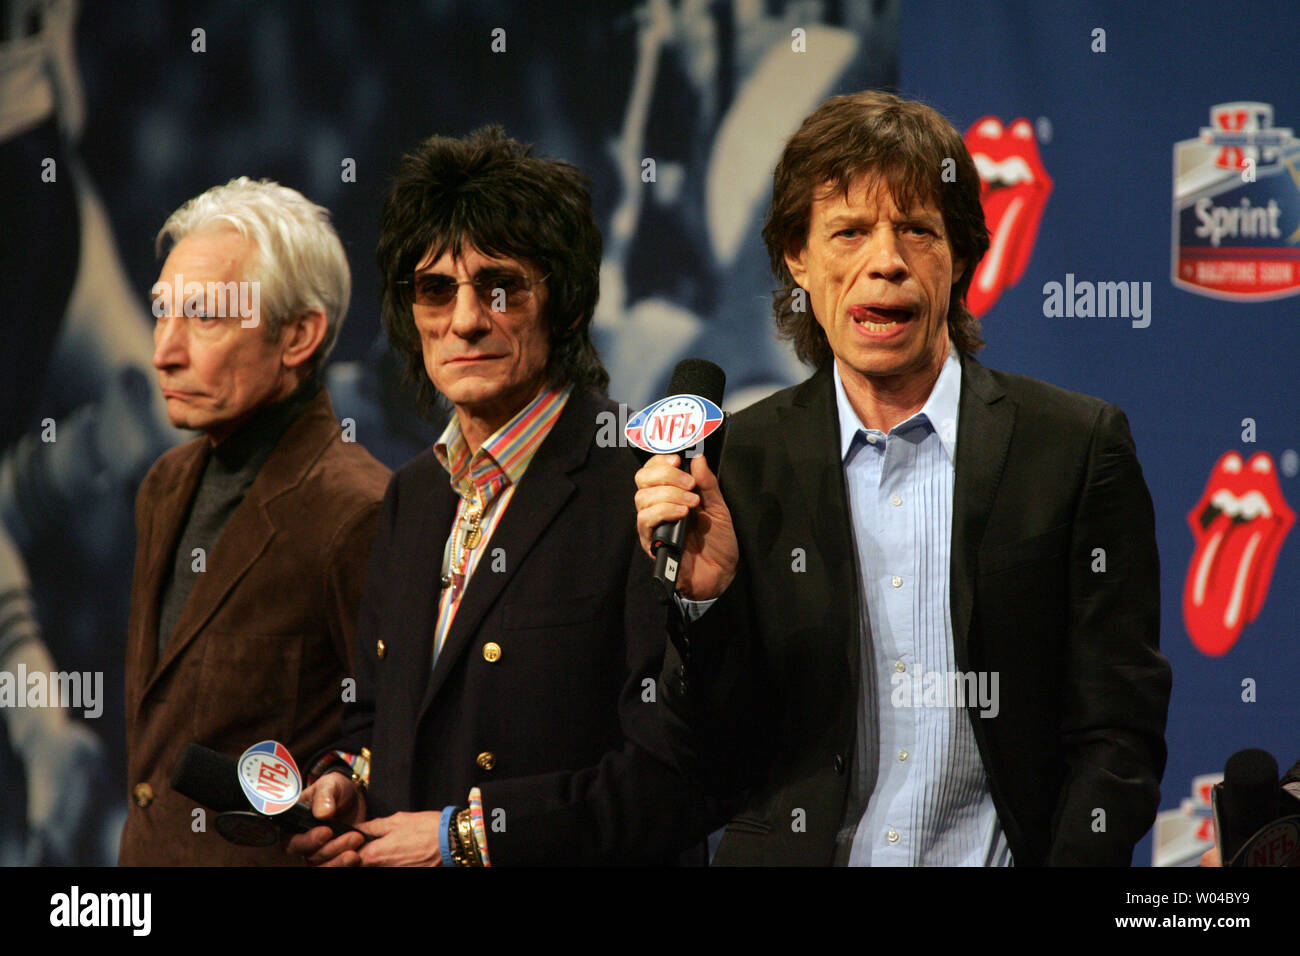 The Rolling Stones (L to R) Charlie Watts, Ron Wood, and Mick Jagger participate in a news conference discussing the half-time entertainment for Super Bowl XL on February 2, 2006, in Detroit, Mi. Super Bowl XL will feature the Pittsburgh Steelers and the Seattle Seahawks on February 5.   (UPI Photo/Terry Schmitt) Stock Photo